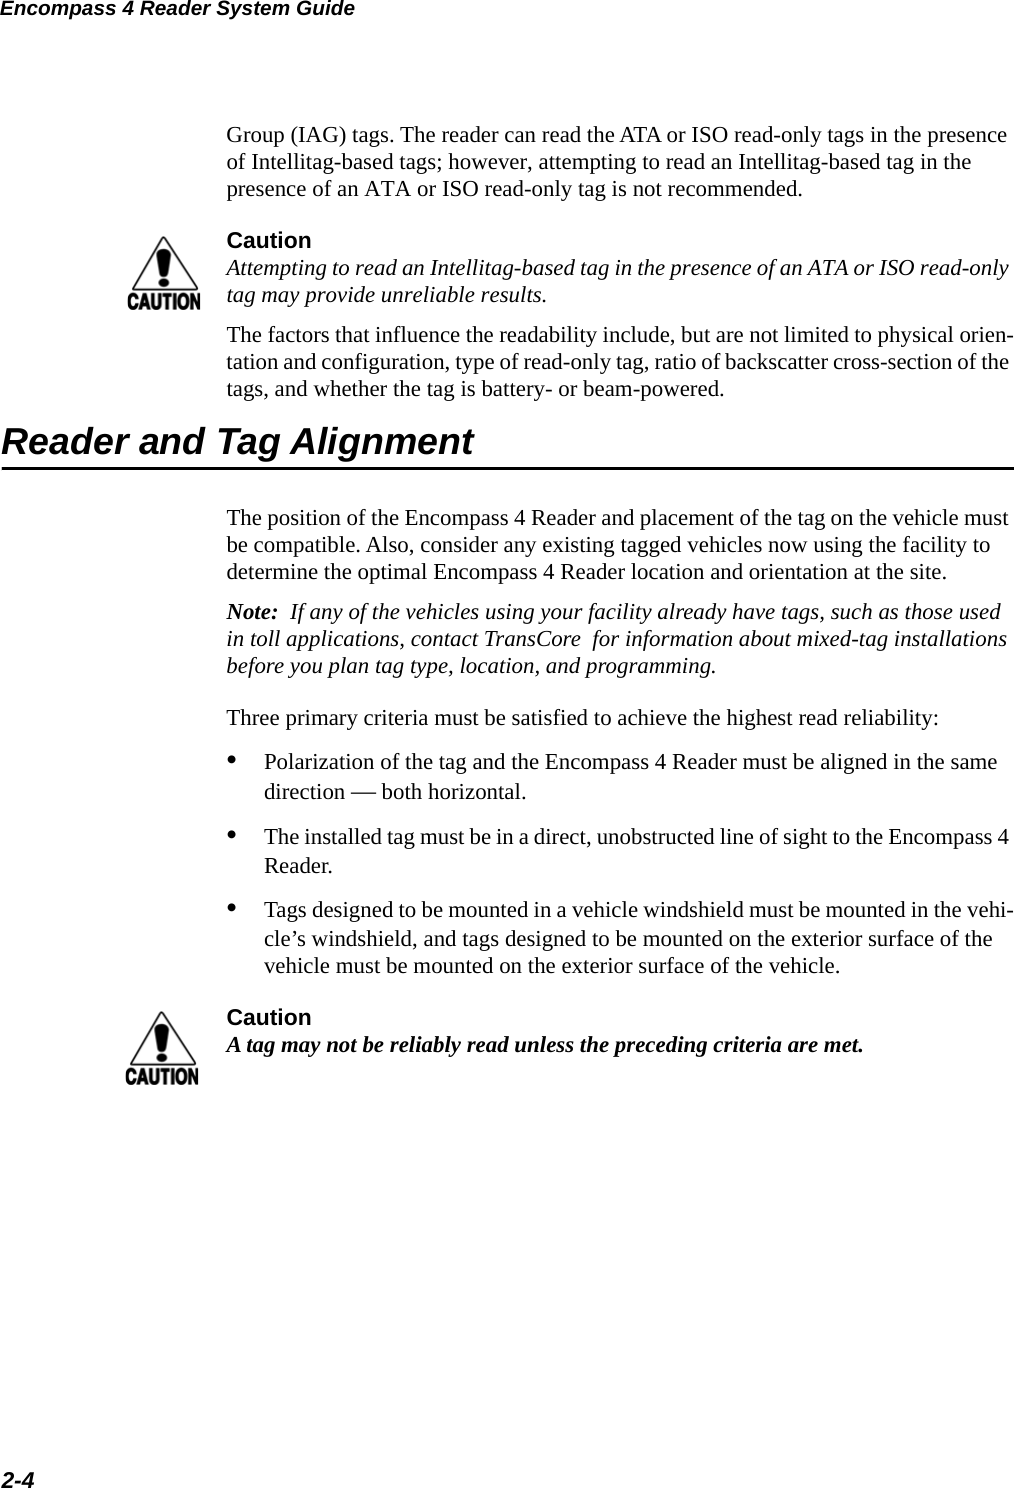 Encompass 4 Reader System Guide2-4Group (IAG) tags. The reader can read the ATA or ISO read-only tags in the presence of Intellitag-based tags; however, attempting to read an Intellitag-based tag in the presence of an ATA or ISO read-only tag is not recommended.CautionAttempting to read an Intellitag-based tag in the presence of an ATA or ISO read-only tag may provide unreliable results.The factors that influence the readability include, but are not limited to physical orien-tation and configuration, type of read-only tag, ratio of backscatter cross-section of the tags, and whether the tag is battery- or beam-powered.Reader and Tag AlignmentThe position of the Encompass 4 Reader and placement of the tag on the vehicle must be compatible. Also, consider any existing tagged vehicles now using the facility to determine the optimal Encompass 4 Reader location and orientation at the site.Note:  If any of the vehicles using your facility already have tags, such as those used in toll applications, contact TransCore  for information about mixed-tag installations before you plan tag type, location, and programming.Three primary criteria must be satisfied to achieve the highest read reliability:•Polarization of the tag and the Encompass 4 Reader must be aligned in the same direction — both horizontal.•The installed tag must be in a direct, unobstructed line of sight to the Encompass 4 Reader.•Tags designed to be mounted in a vehicle windshield must be mounted in the vehi-cle’s windshield, and tags designed to be mounted on the exterior surface of the vehicle must be mounted on the exterior surface of the vehicle.CautionA tag may not be reliably read unless the preceding criteria are met.